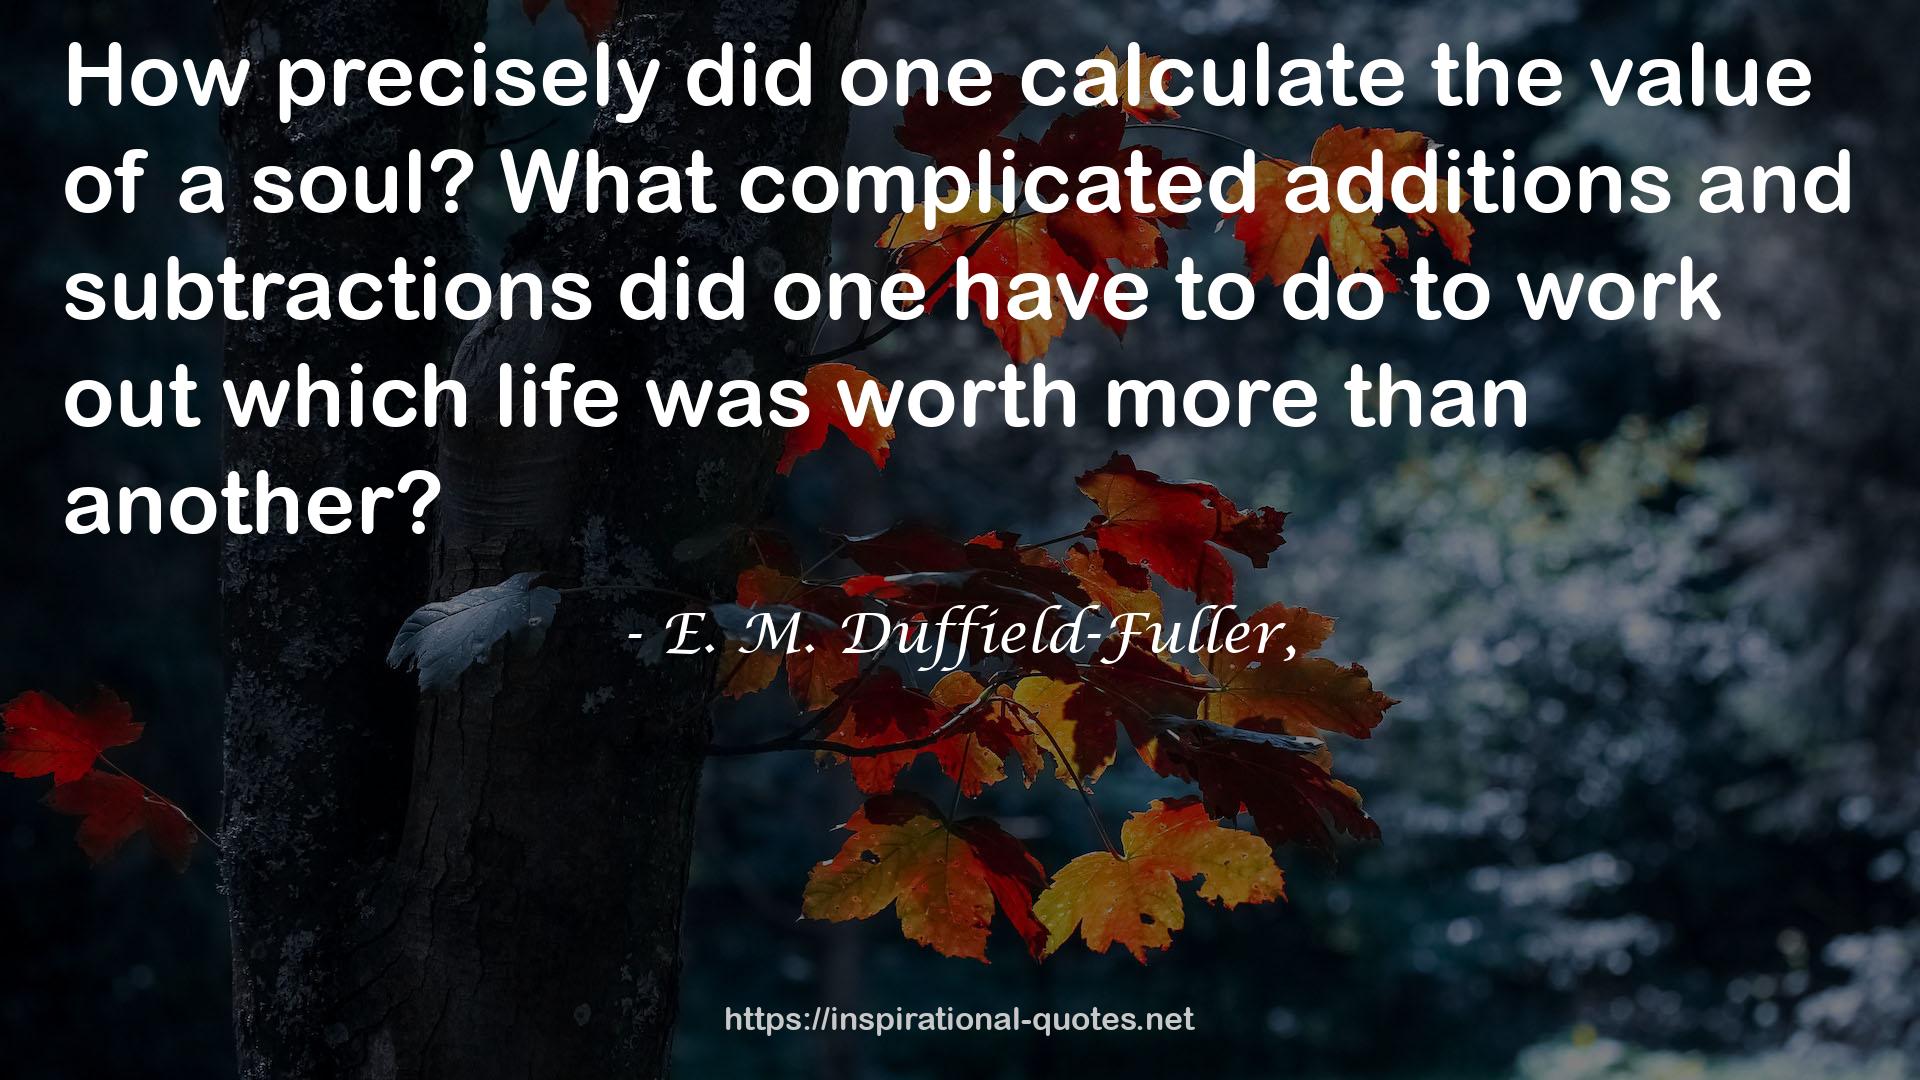 E. M. Duffield-Fuller, QUOTES